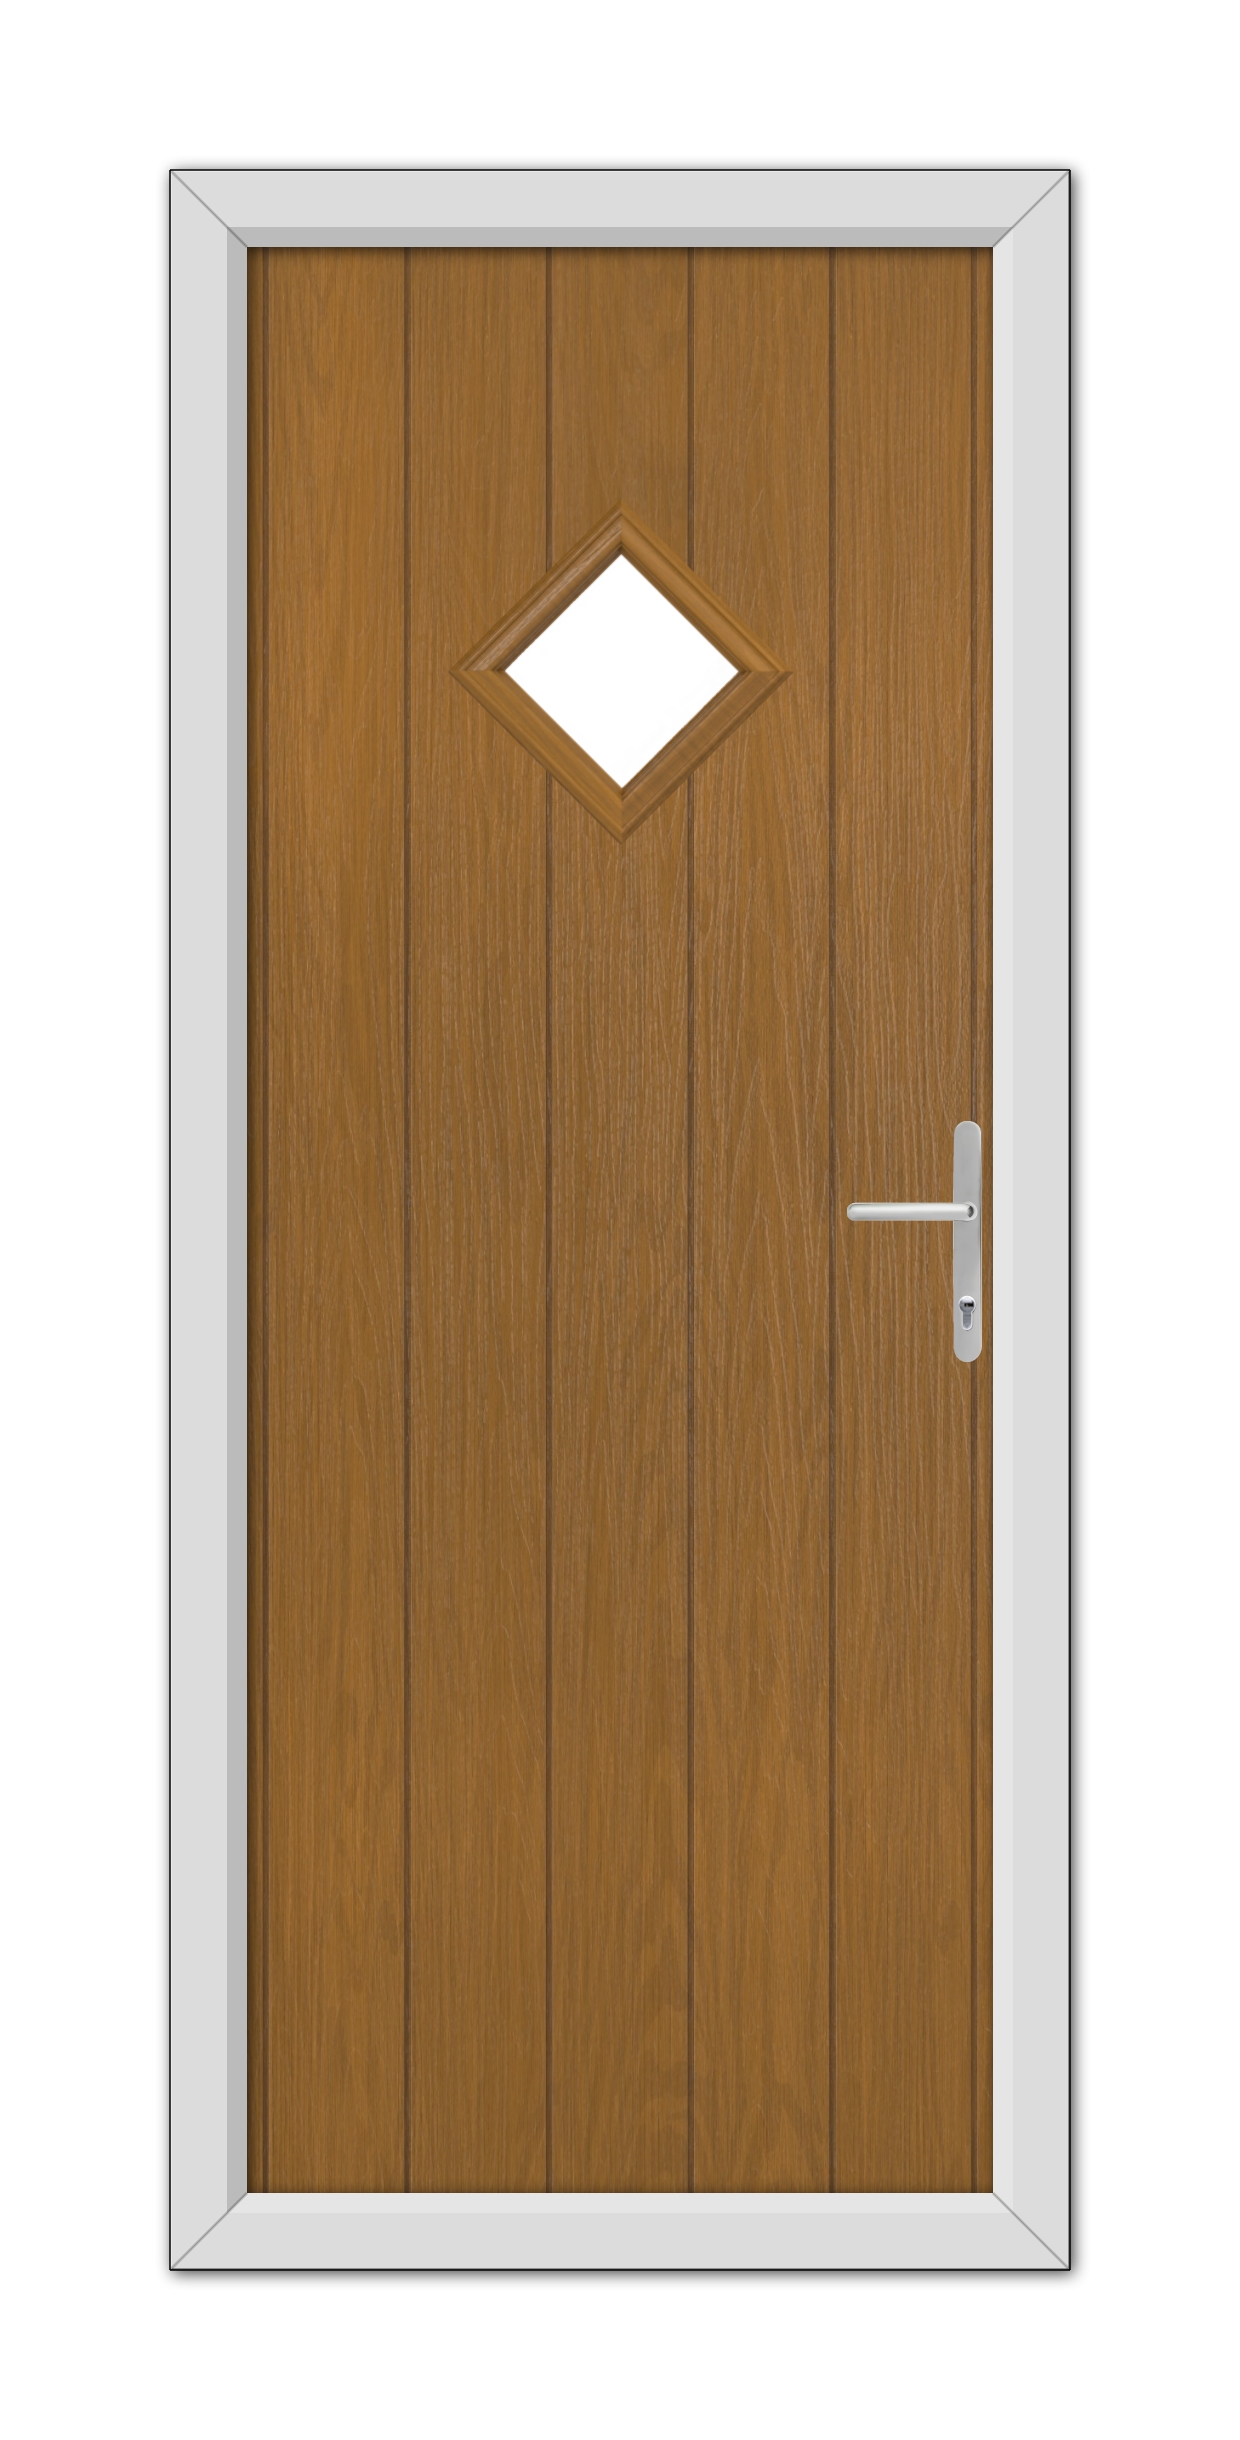 Oak Cornwall Composite Door 48mm Timber Core with a diamond-shaped window, set in a white frame, equipped with a modern silver handle.